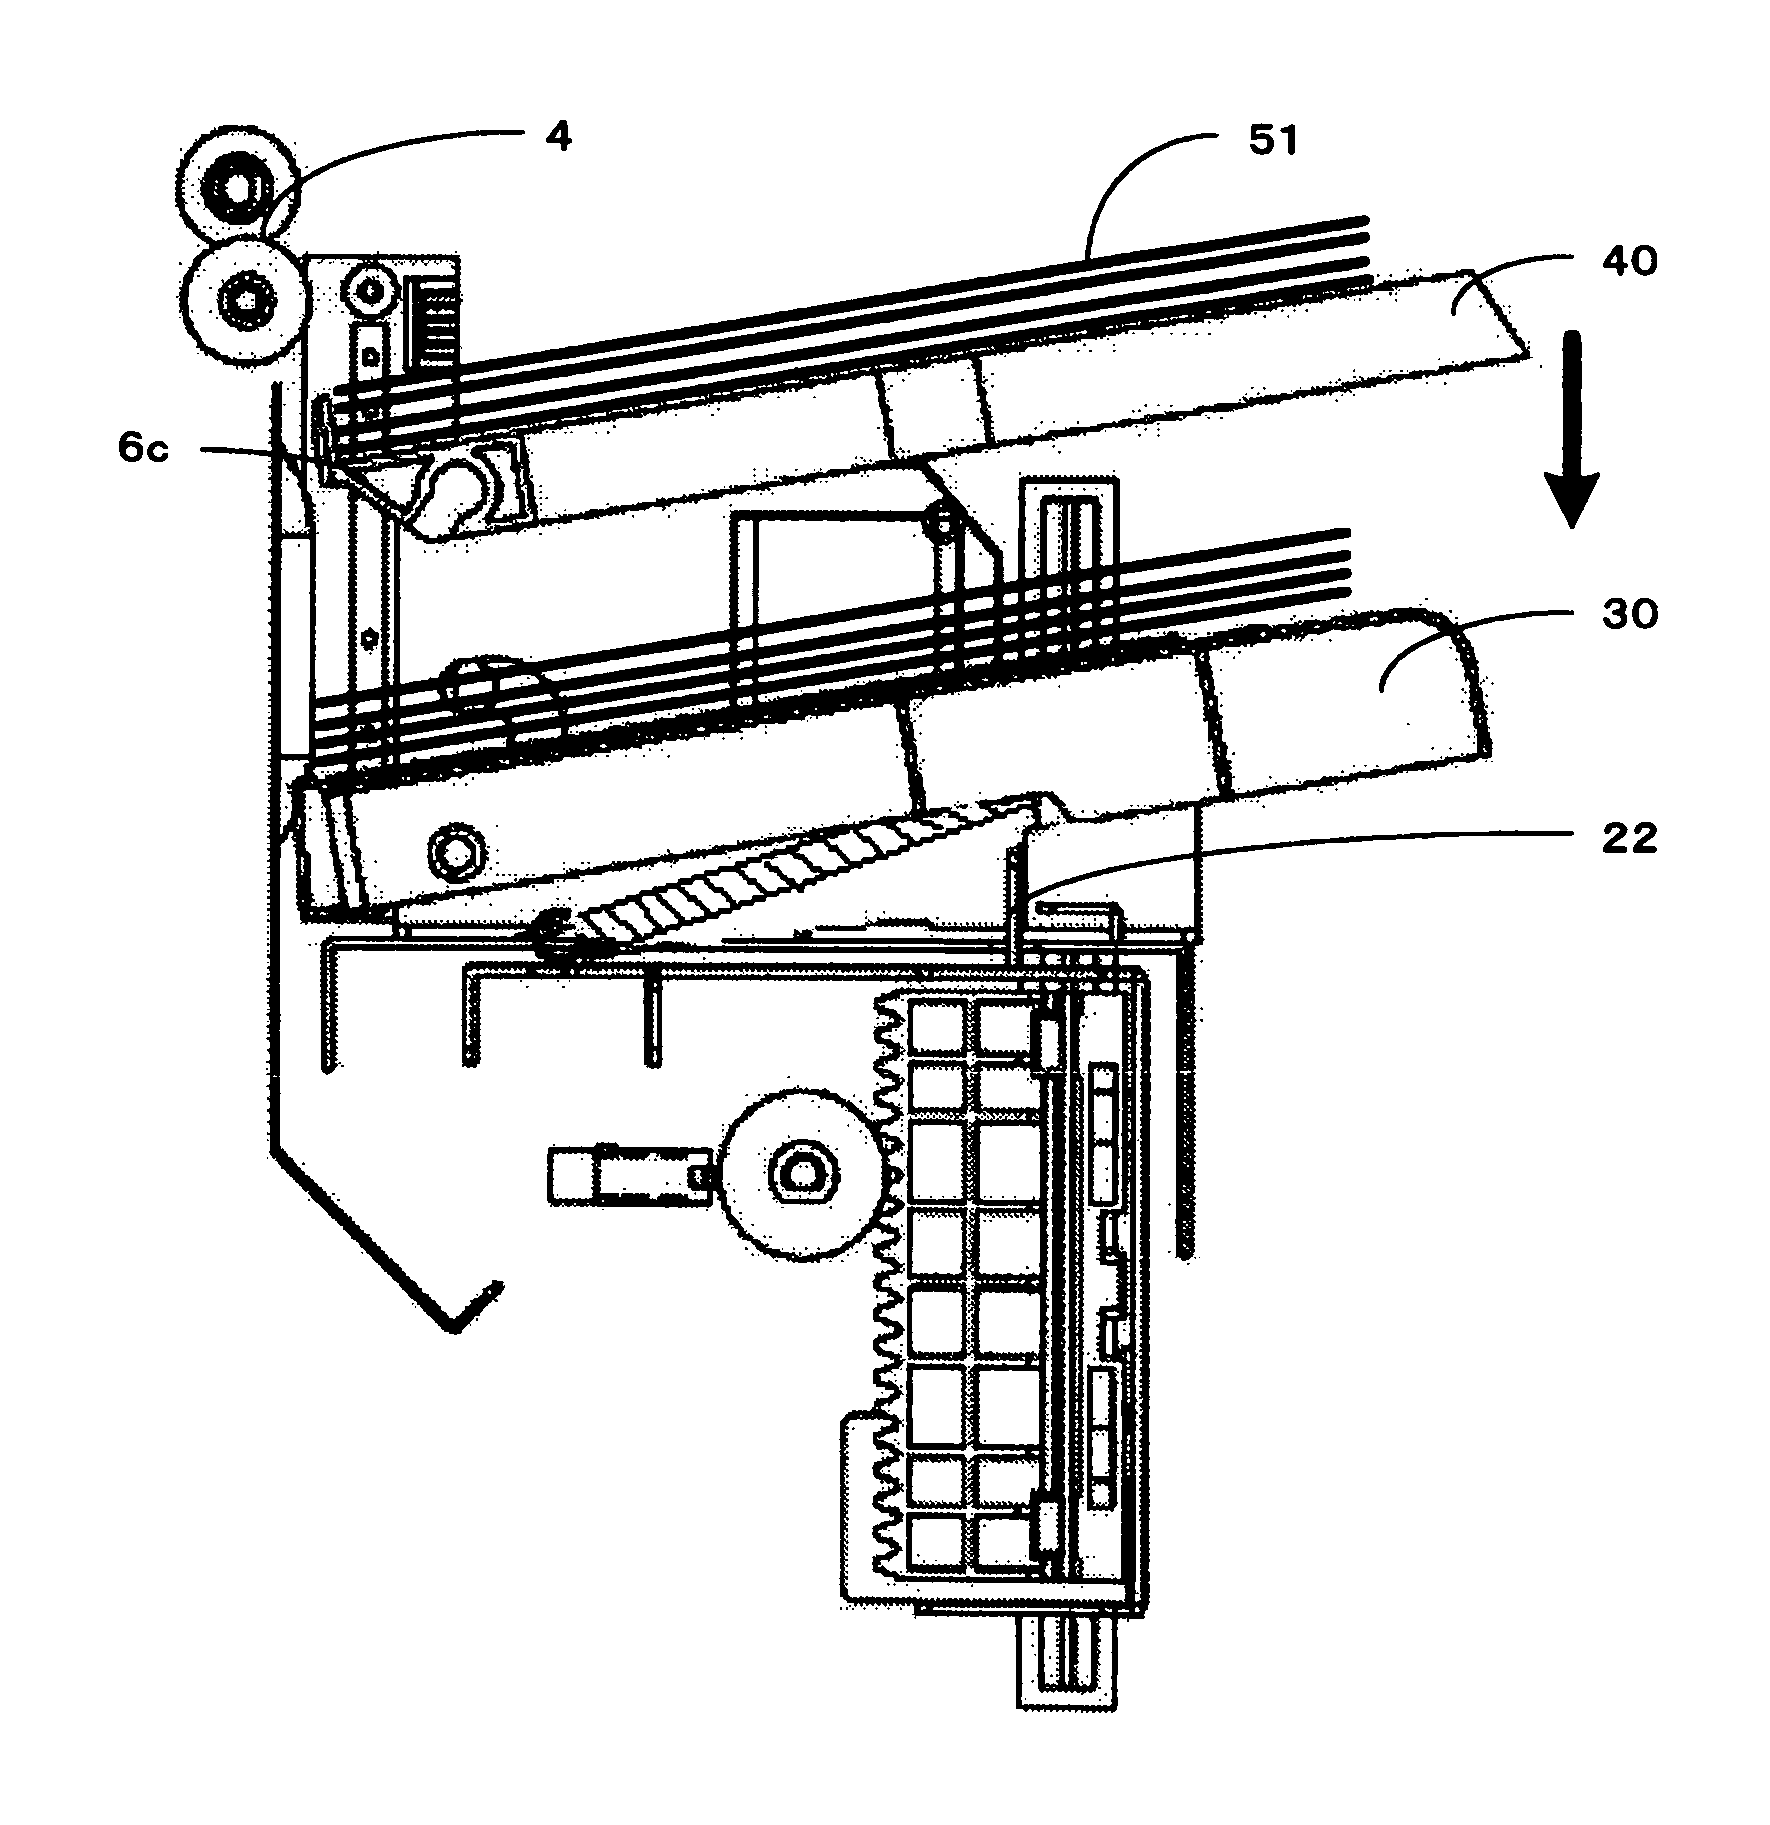 Stacker device